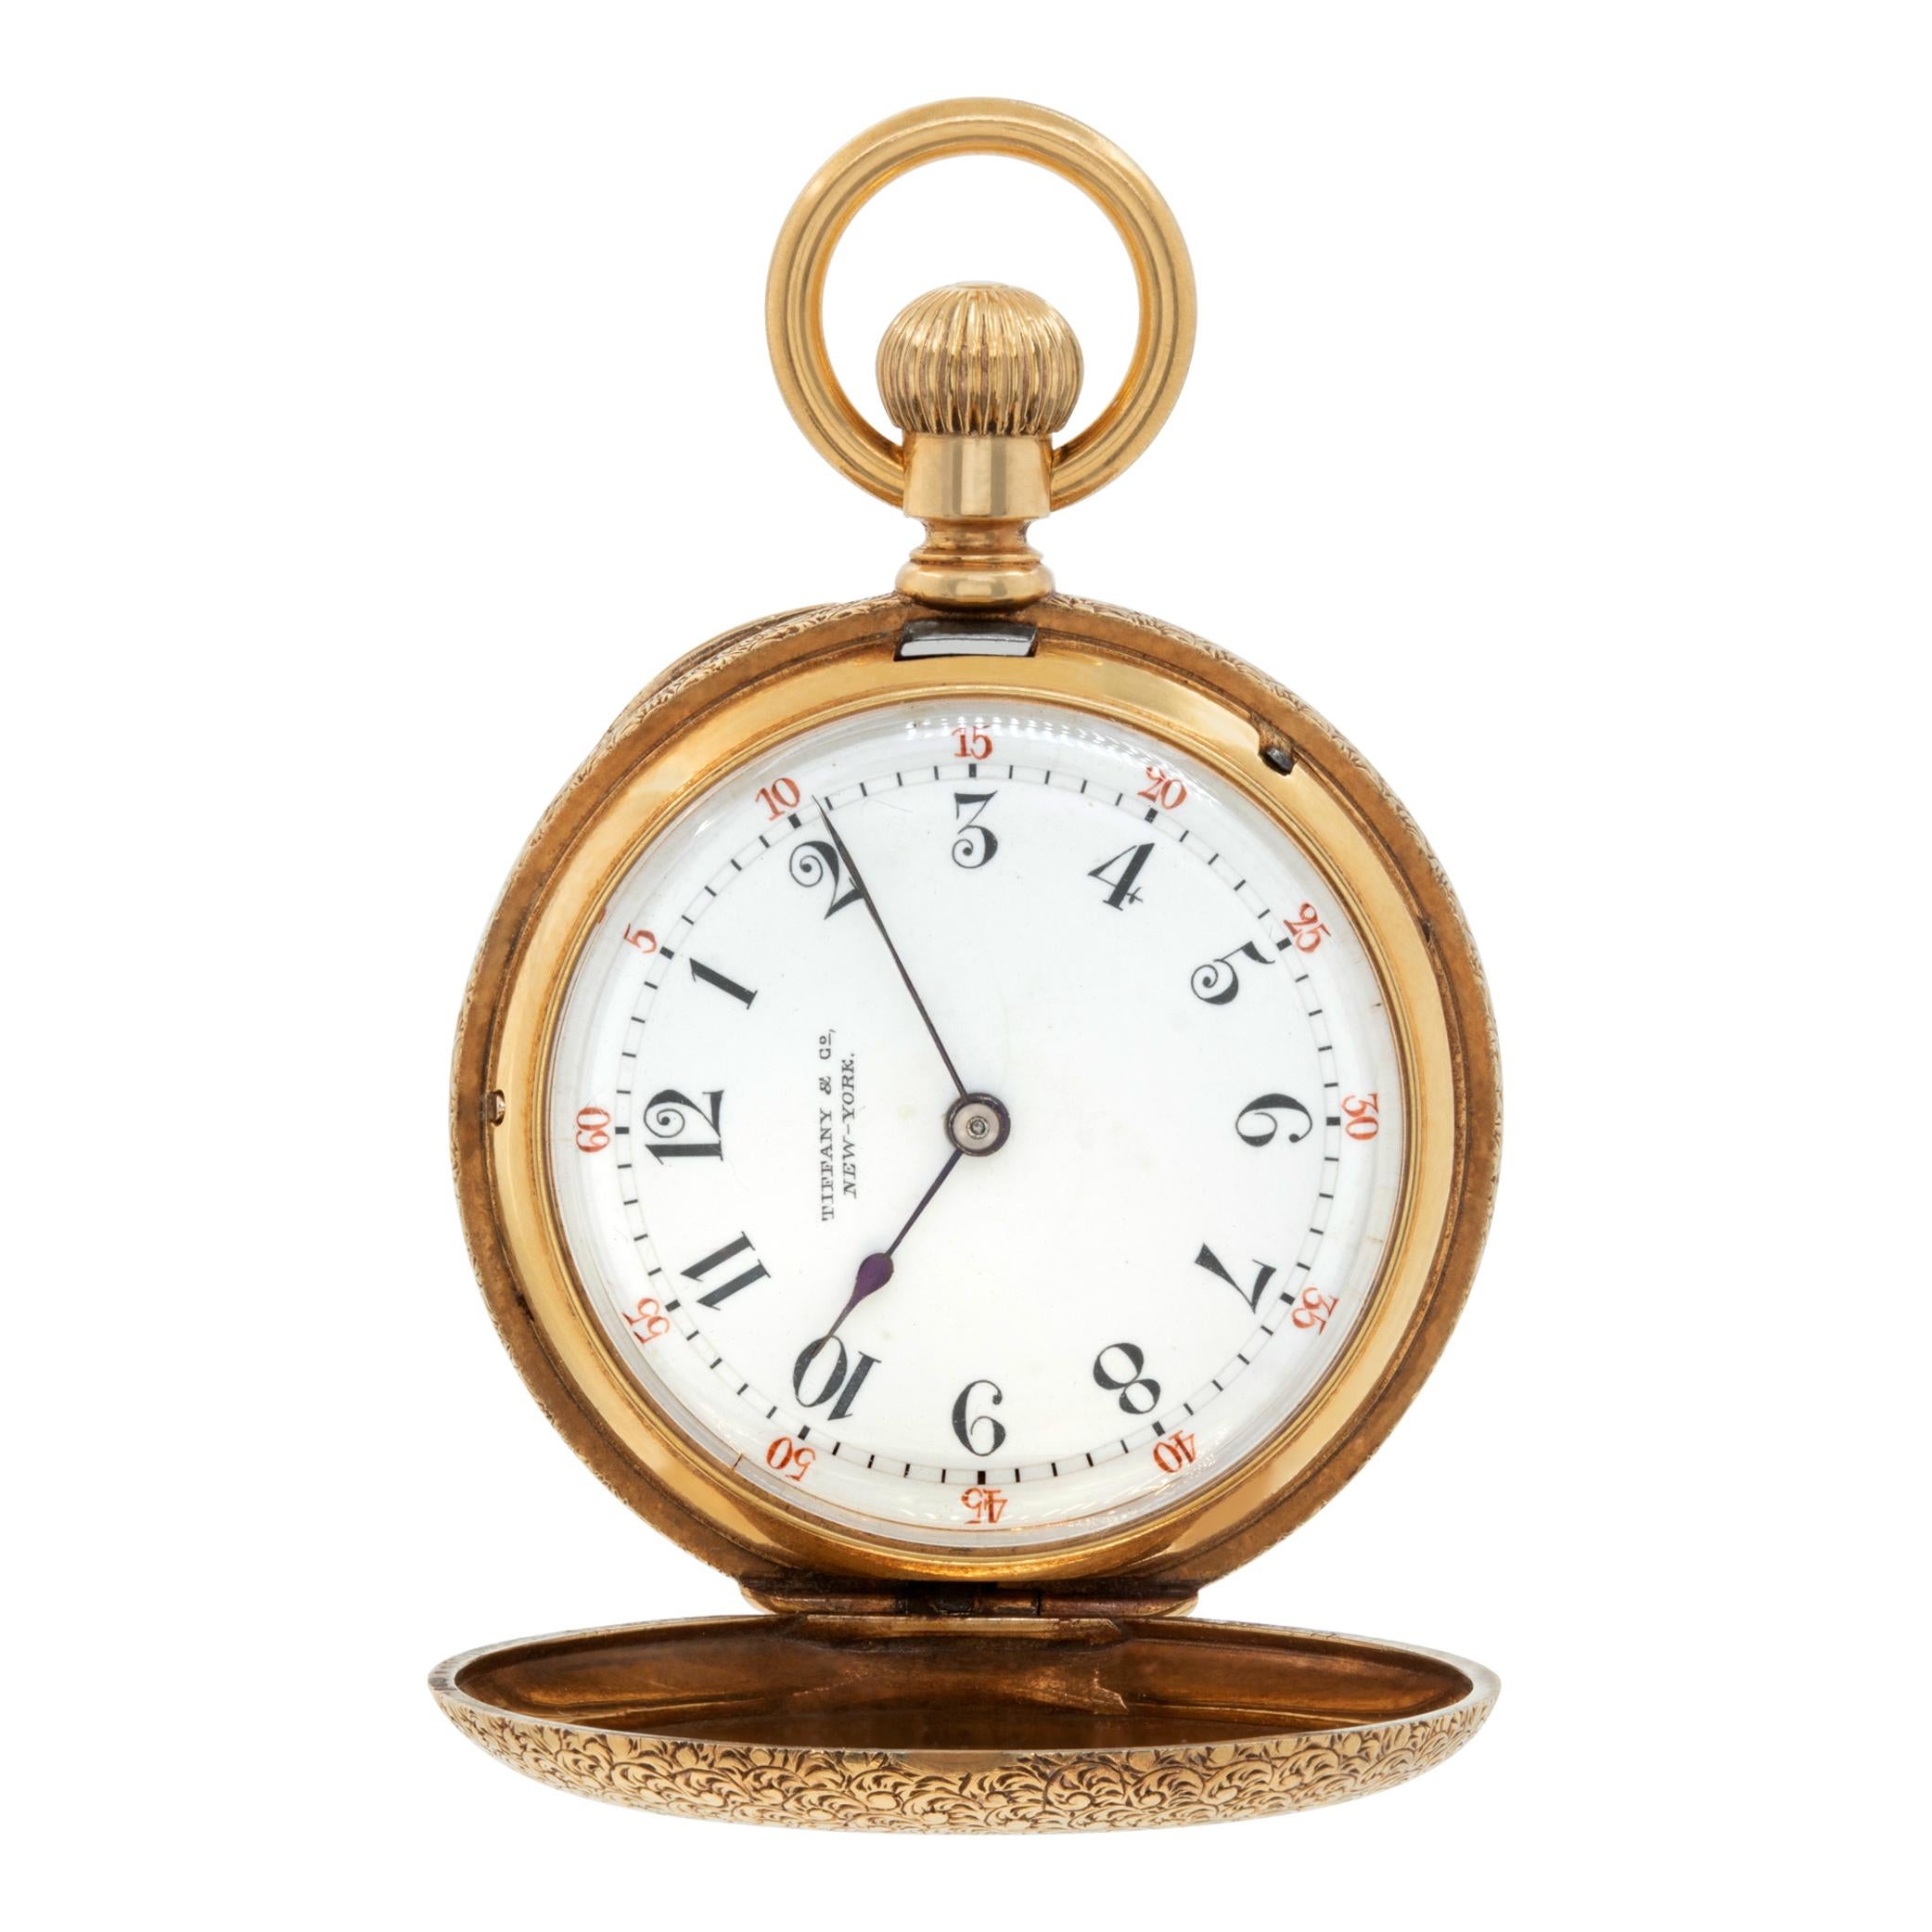 Tiffany & Co. decoratively engraved hunter case pocket watch in 18k yellow gold. 35mm case size. Engraved with 